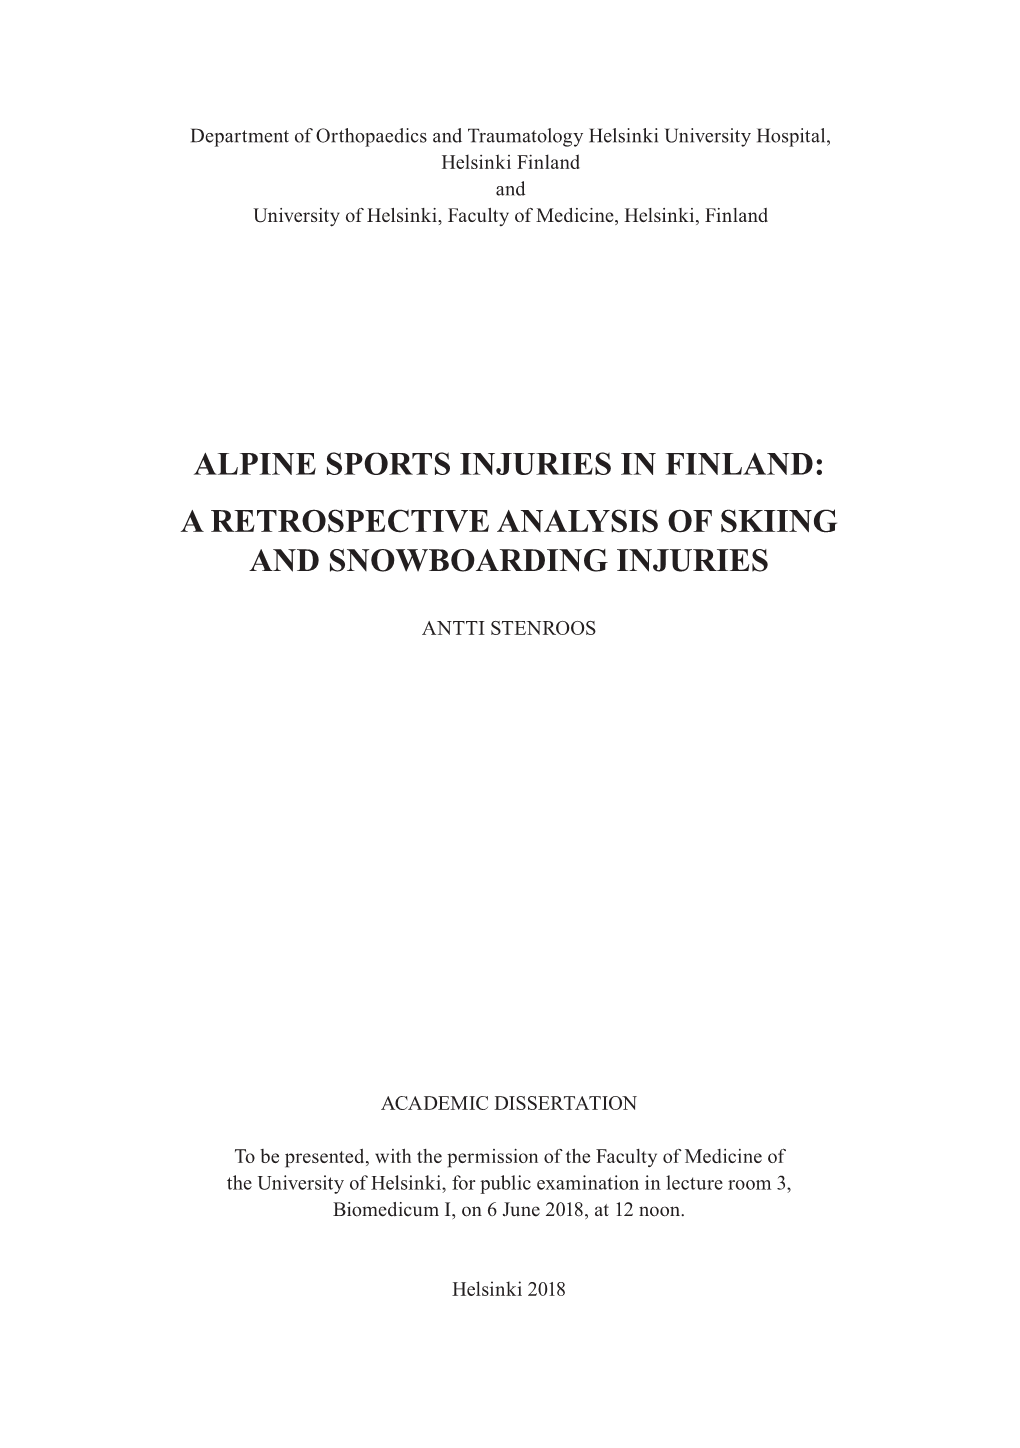 Alpine Sports Injuries in Finland: a Retrospective Analysis of Skiing and Snowboarding Injuries